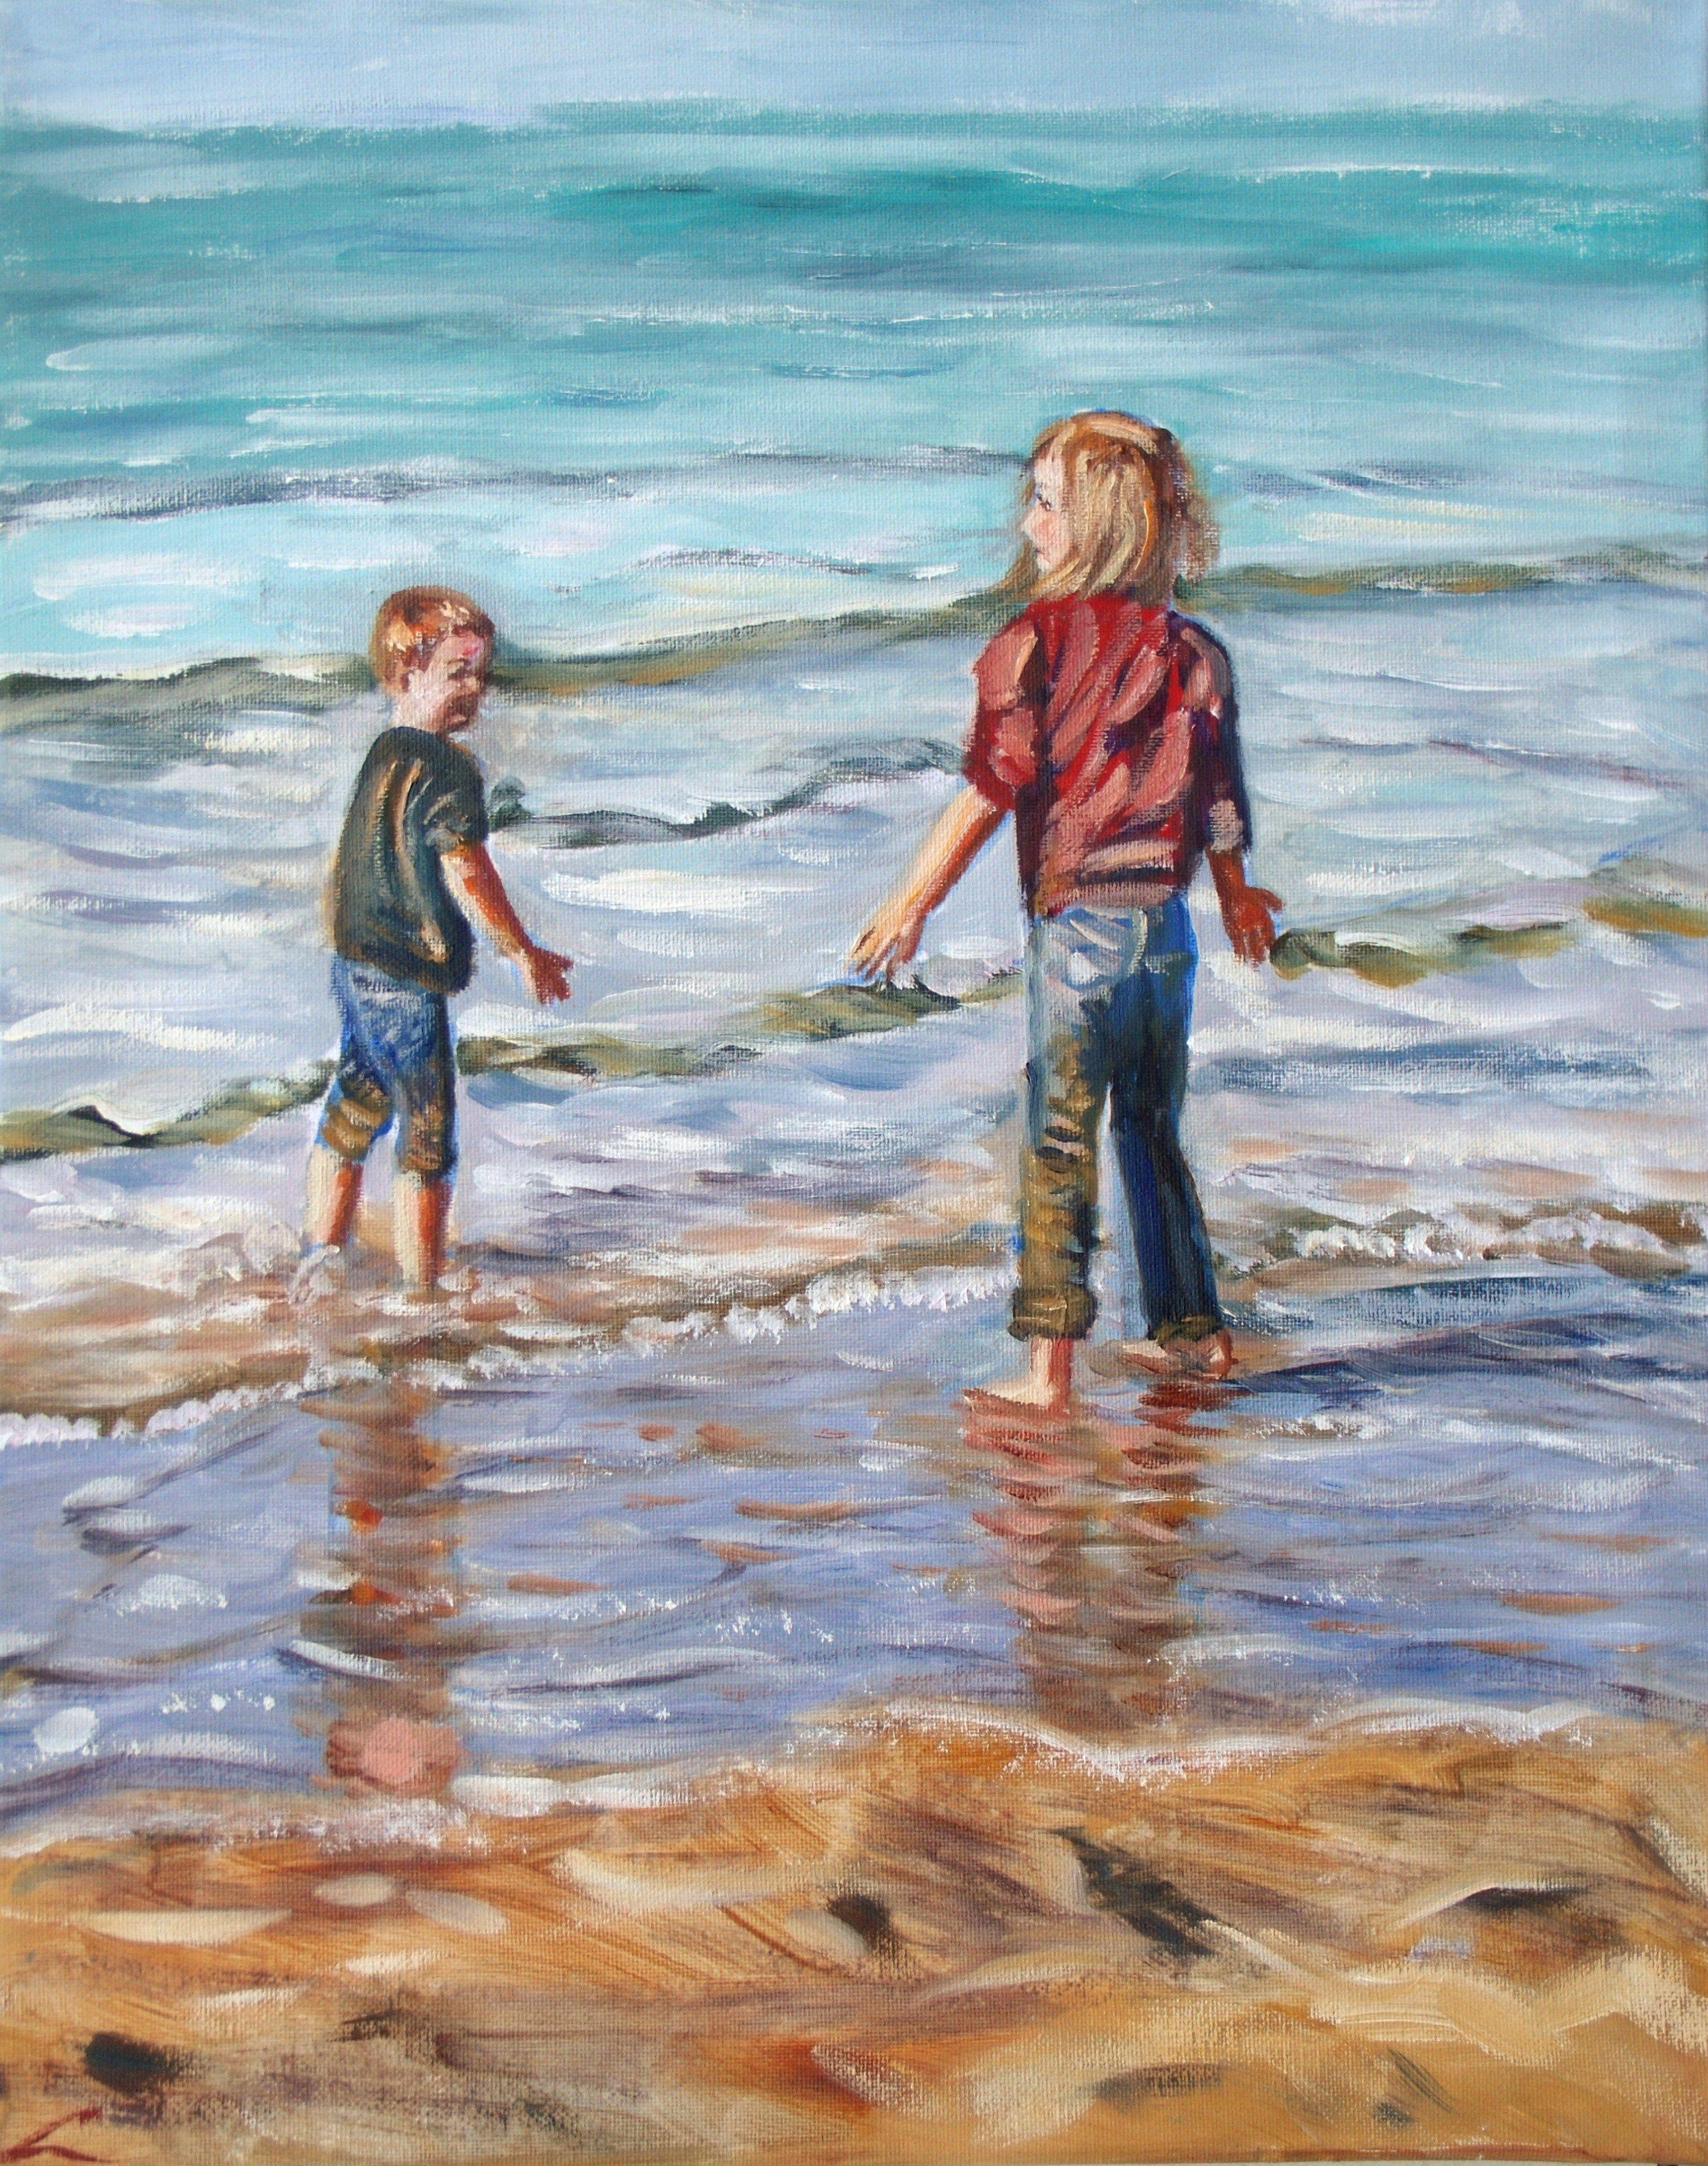 Two children at the sea. Alla prima oil painting with few final touches when dry. Beautiful weather with a big shining sun. And I'm standing there taking it all in. The many spectacular sights jump at my eyes. Kids and dogs run around and splash